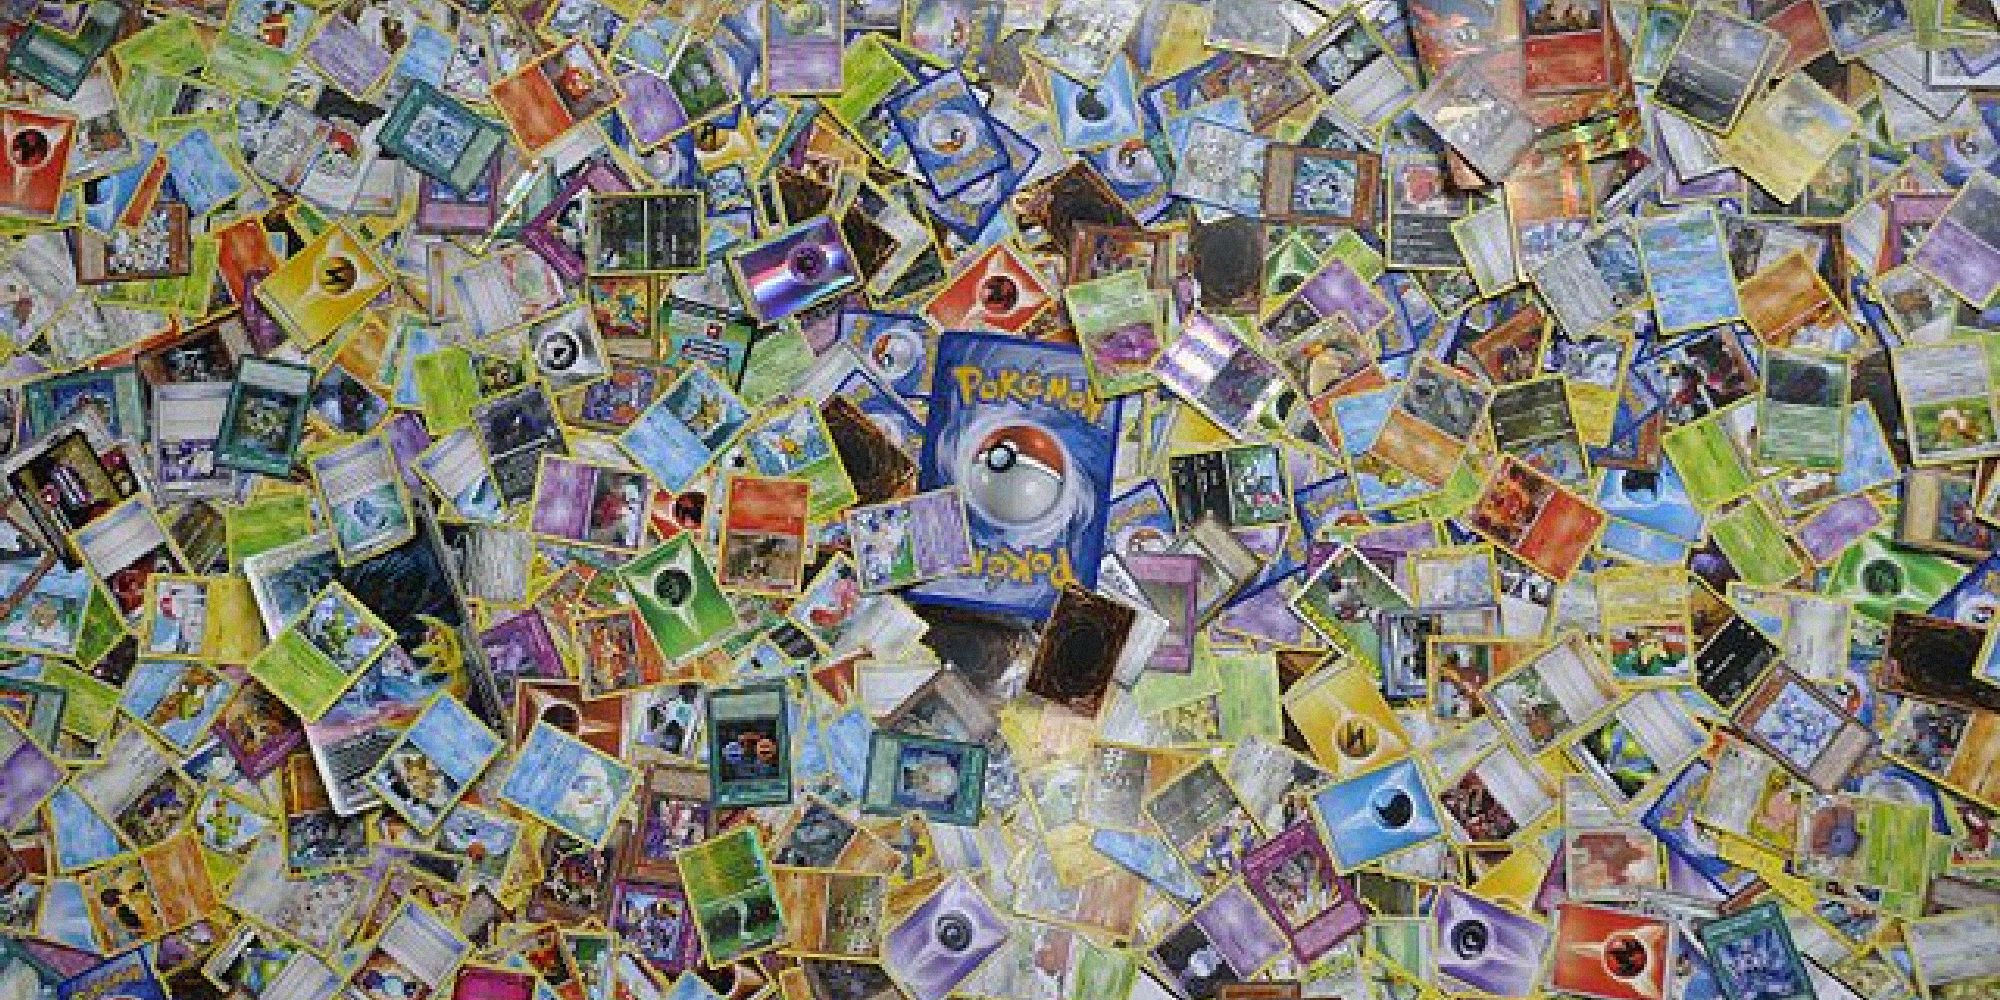 Thief Hides $70,000 Worth Of Stolen Pokemon Cards At Their Mom's House